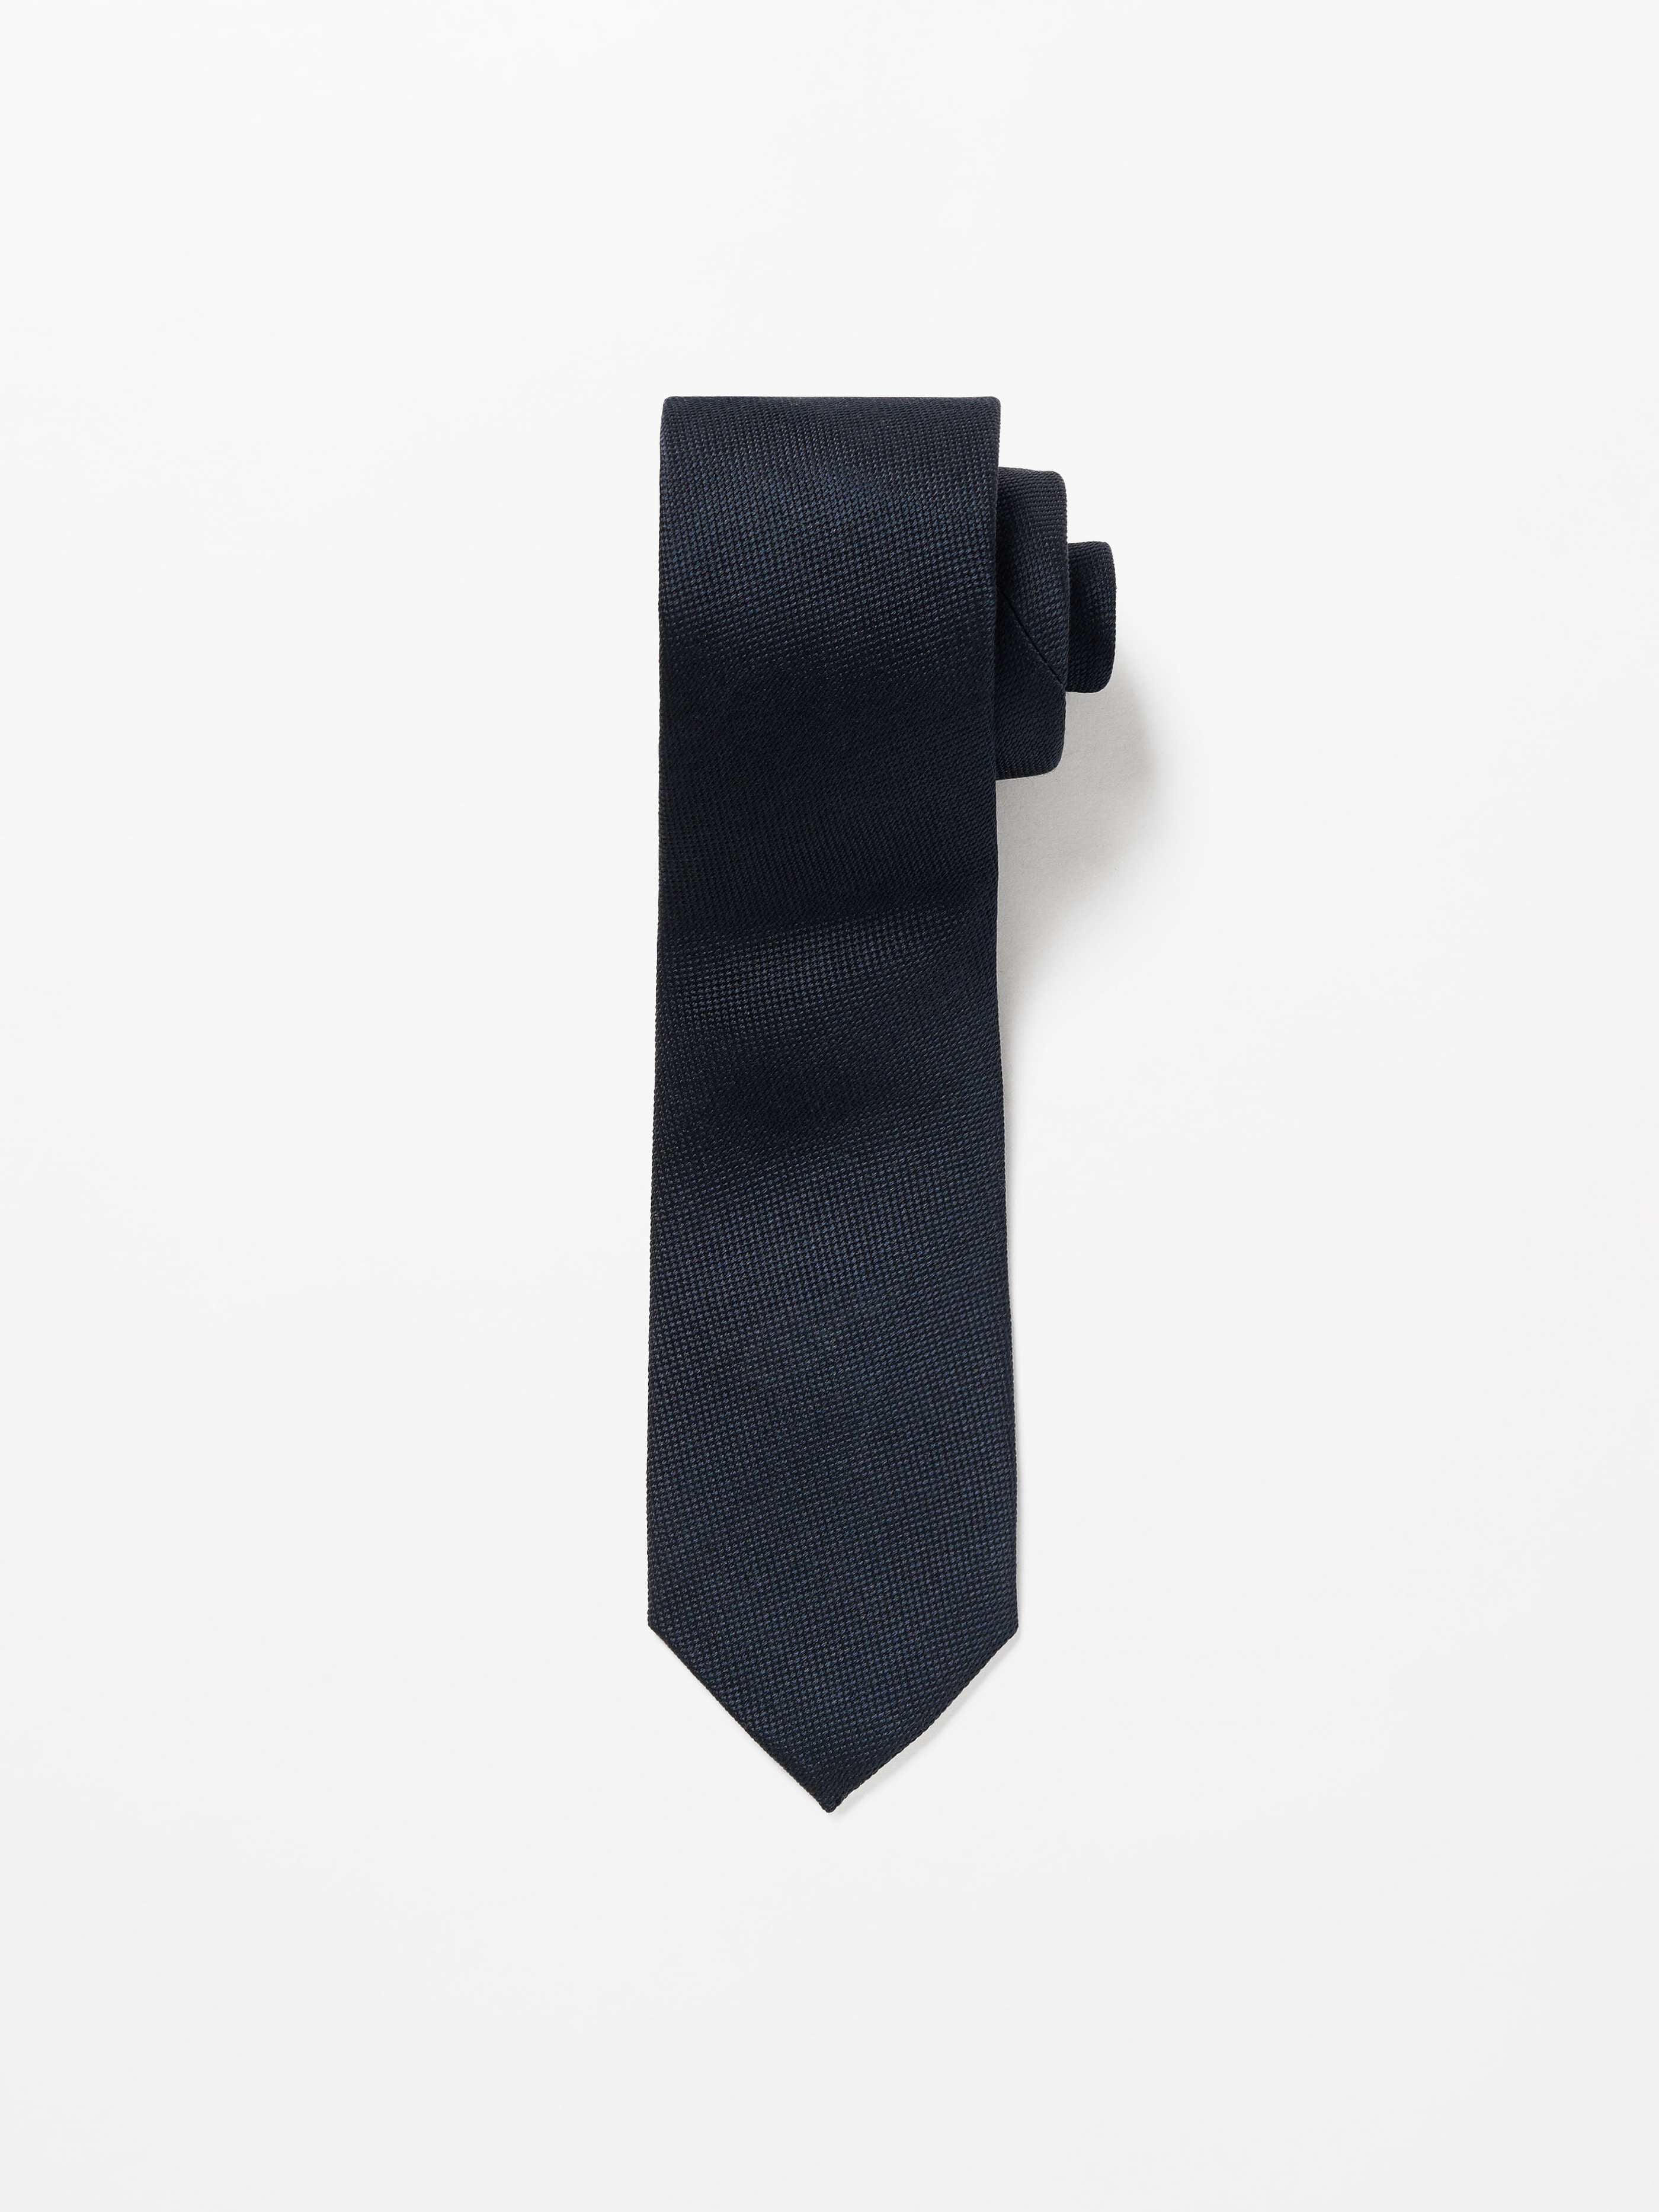 Tiger Of Sweden Tido Tie in Light Ink U67800004Z  | Shop from eightywingold an official brand partner for Tiger Of Sweden in Canada and US.